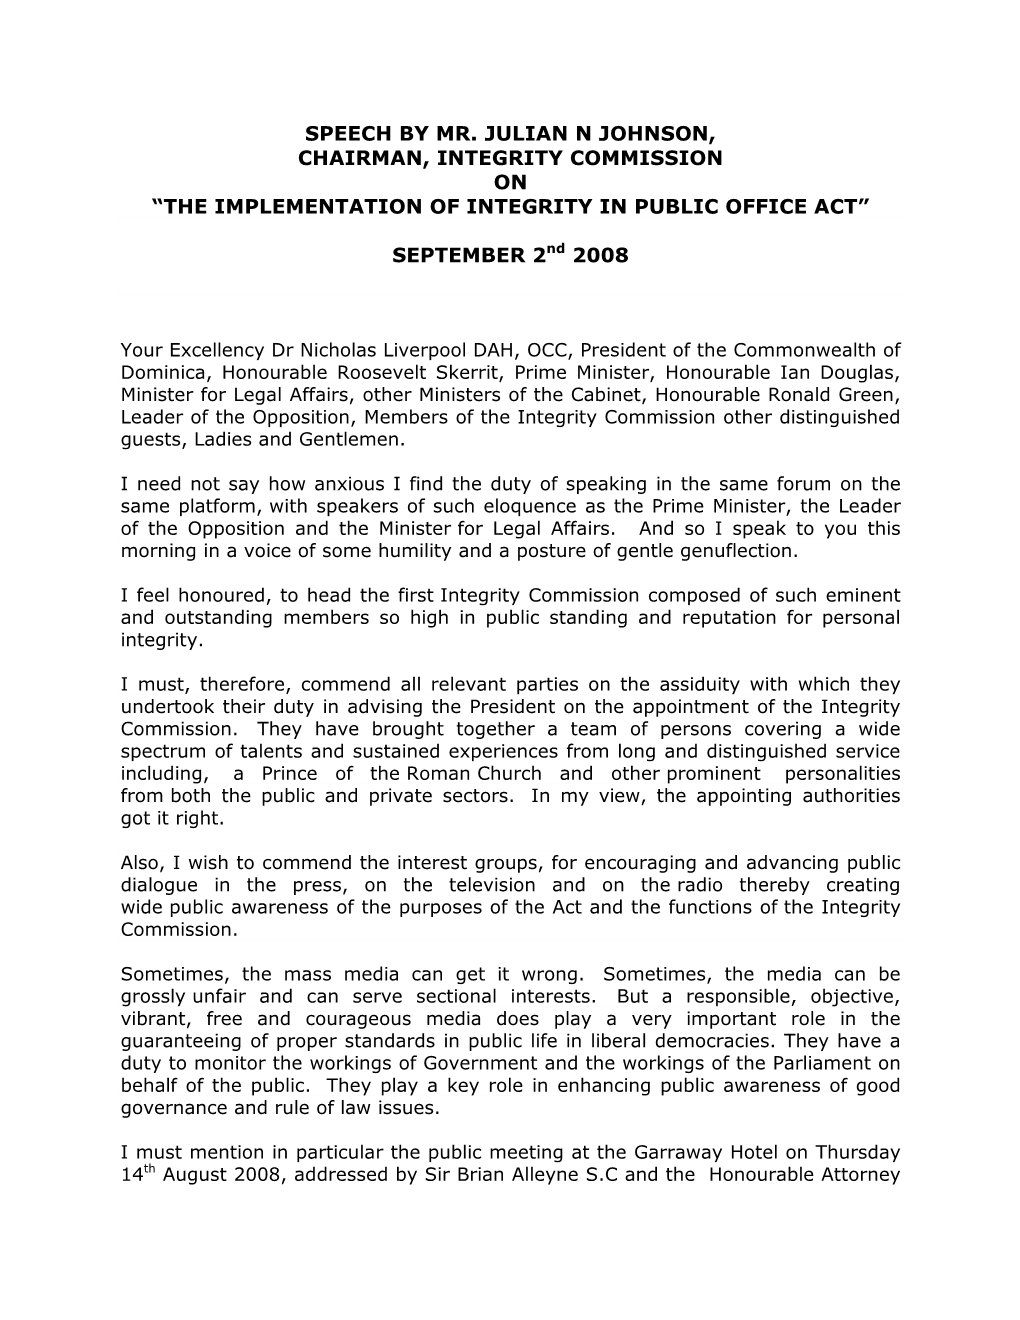 The Implementation of Integrity in Public Office Act”